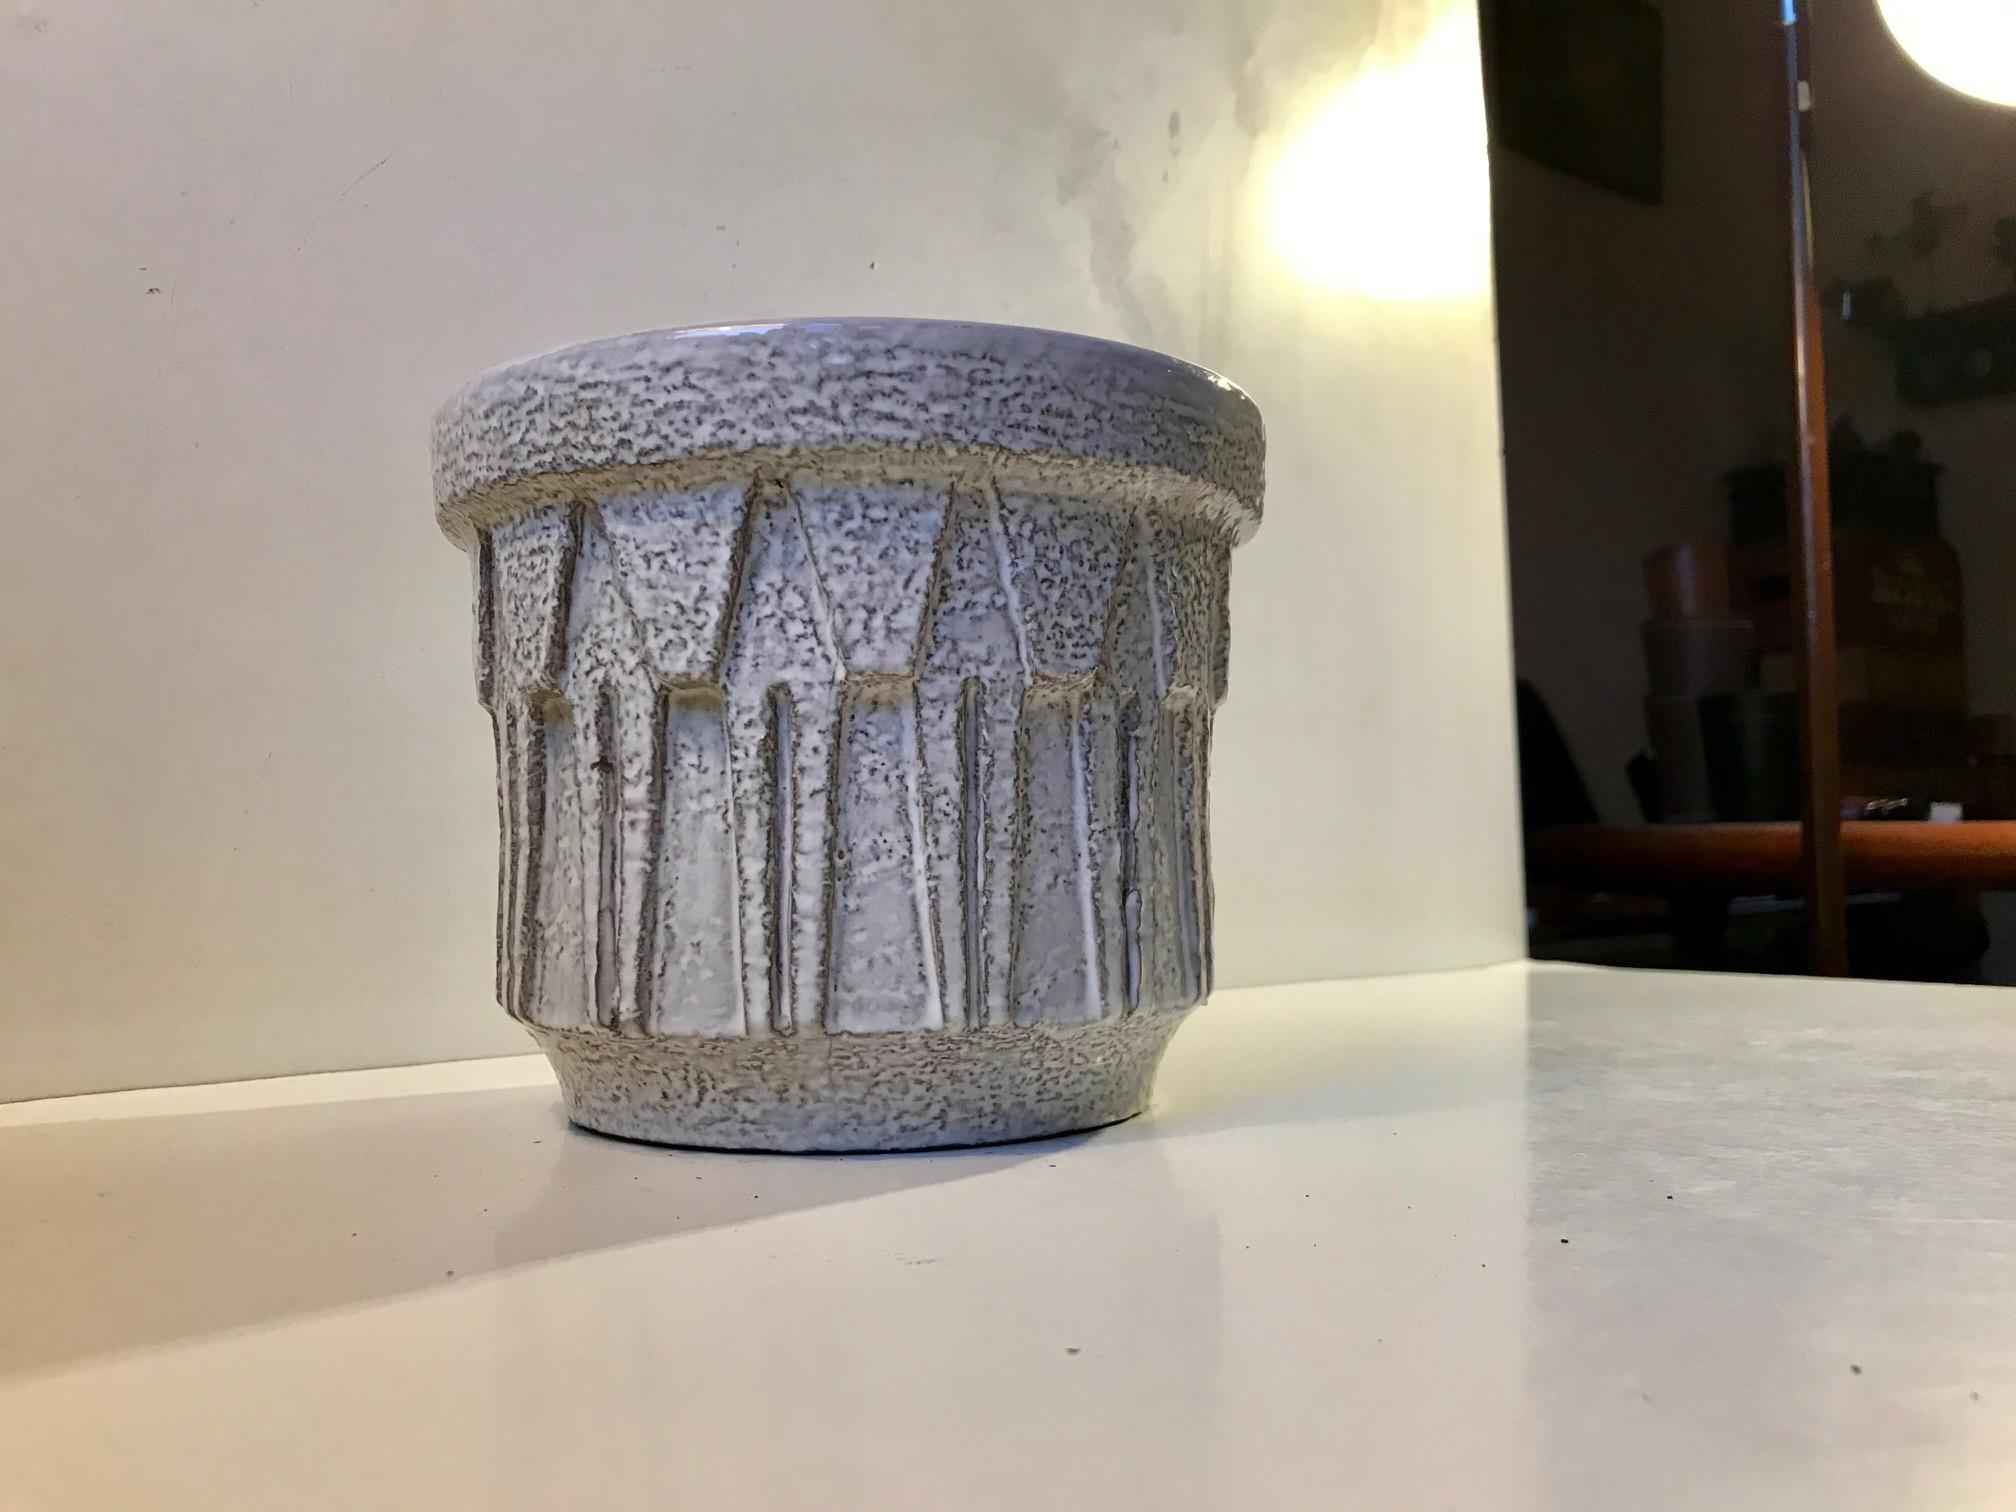 Large stoneware cachepot decorated with dusty white Spatter Glaze and featuring an architectural relief pattern called Cosmos or Alpha. This is the large version measuring: H/D: 16/19 cm and it was made by Ceramano in West Germany circa 1960-65. Its